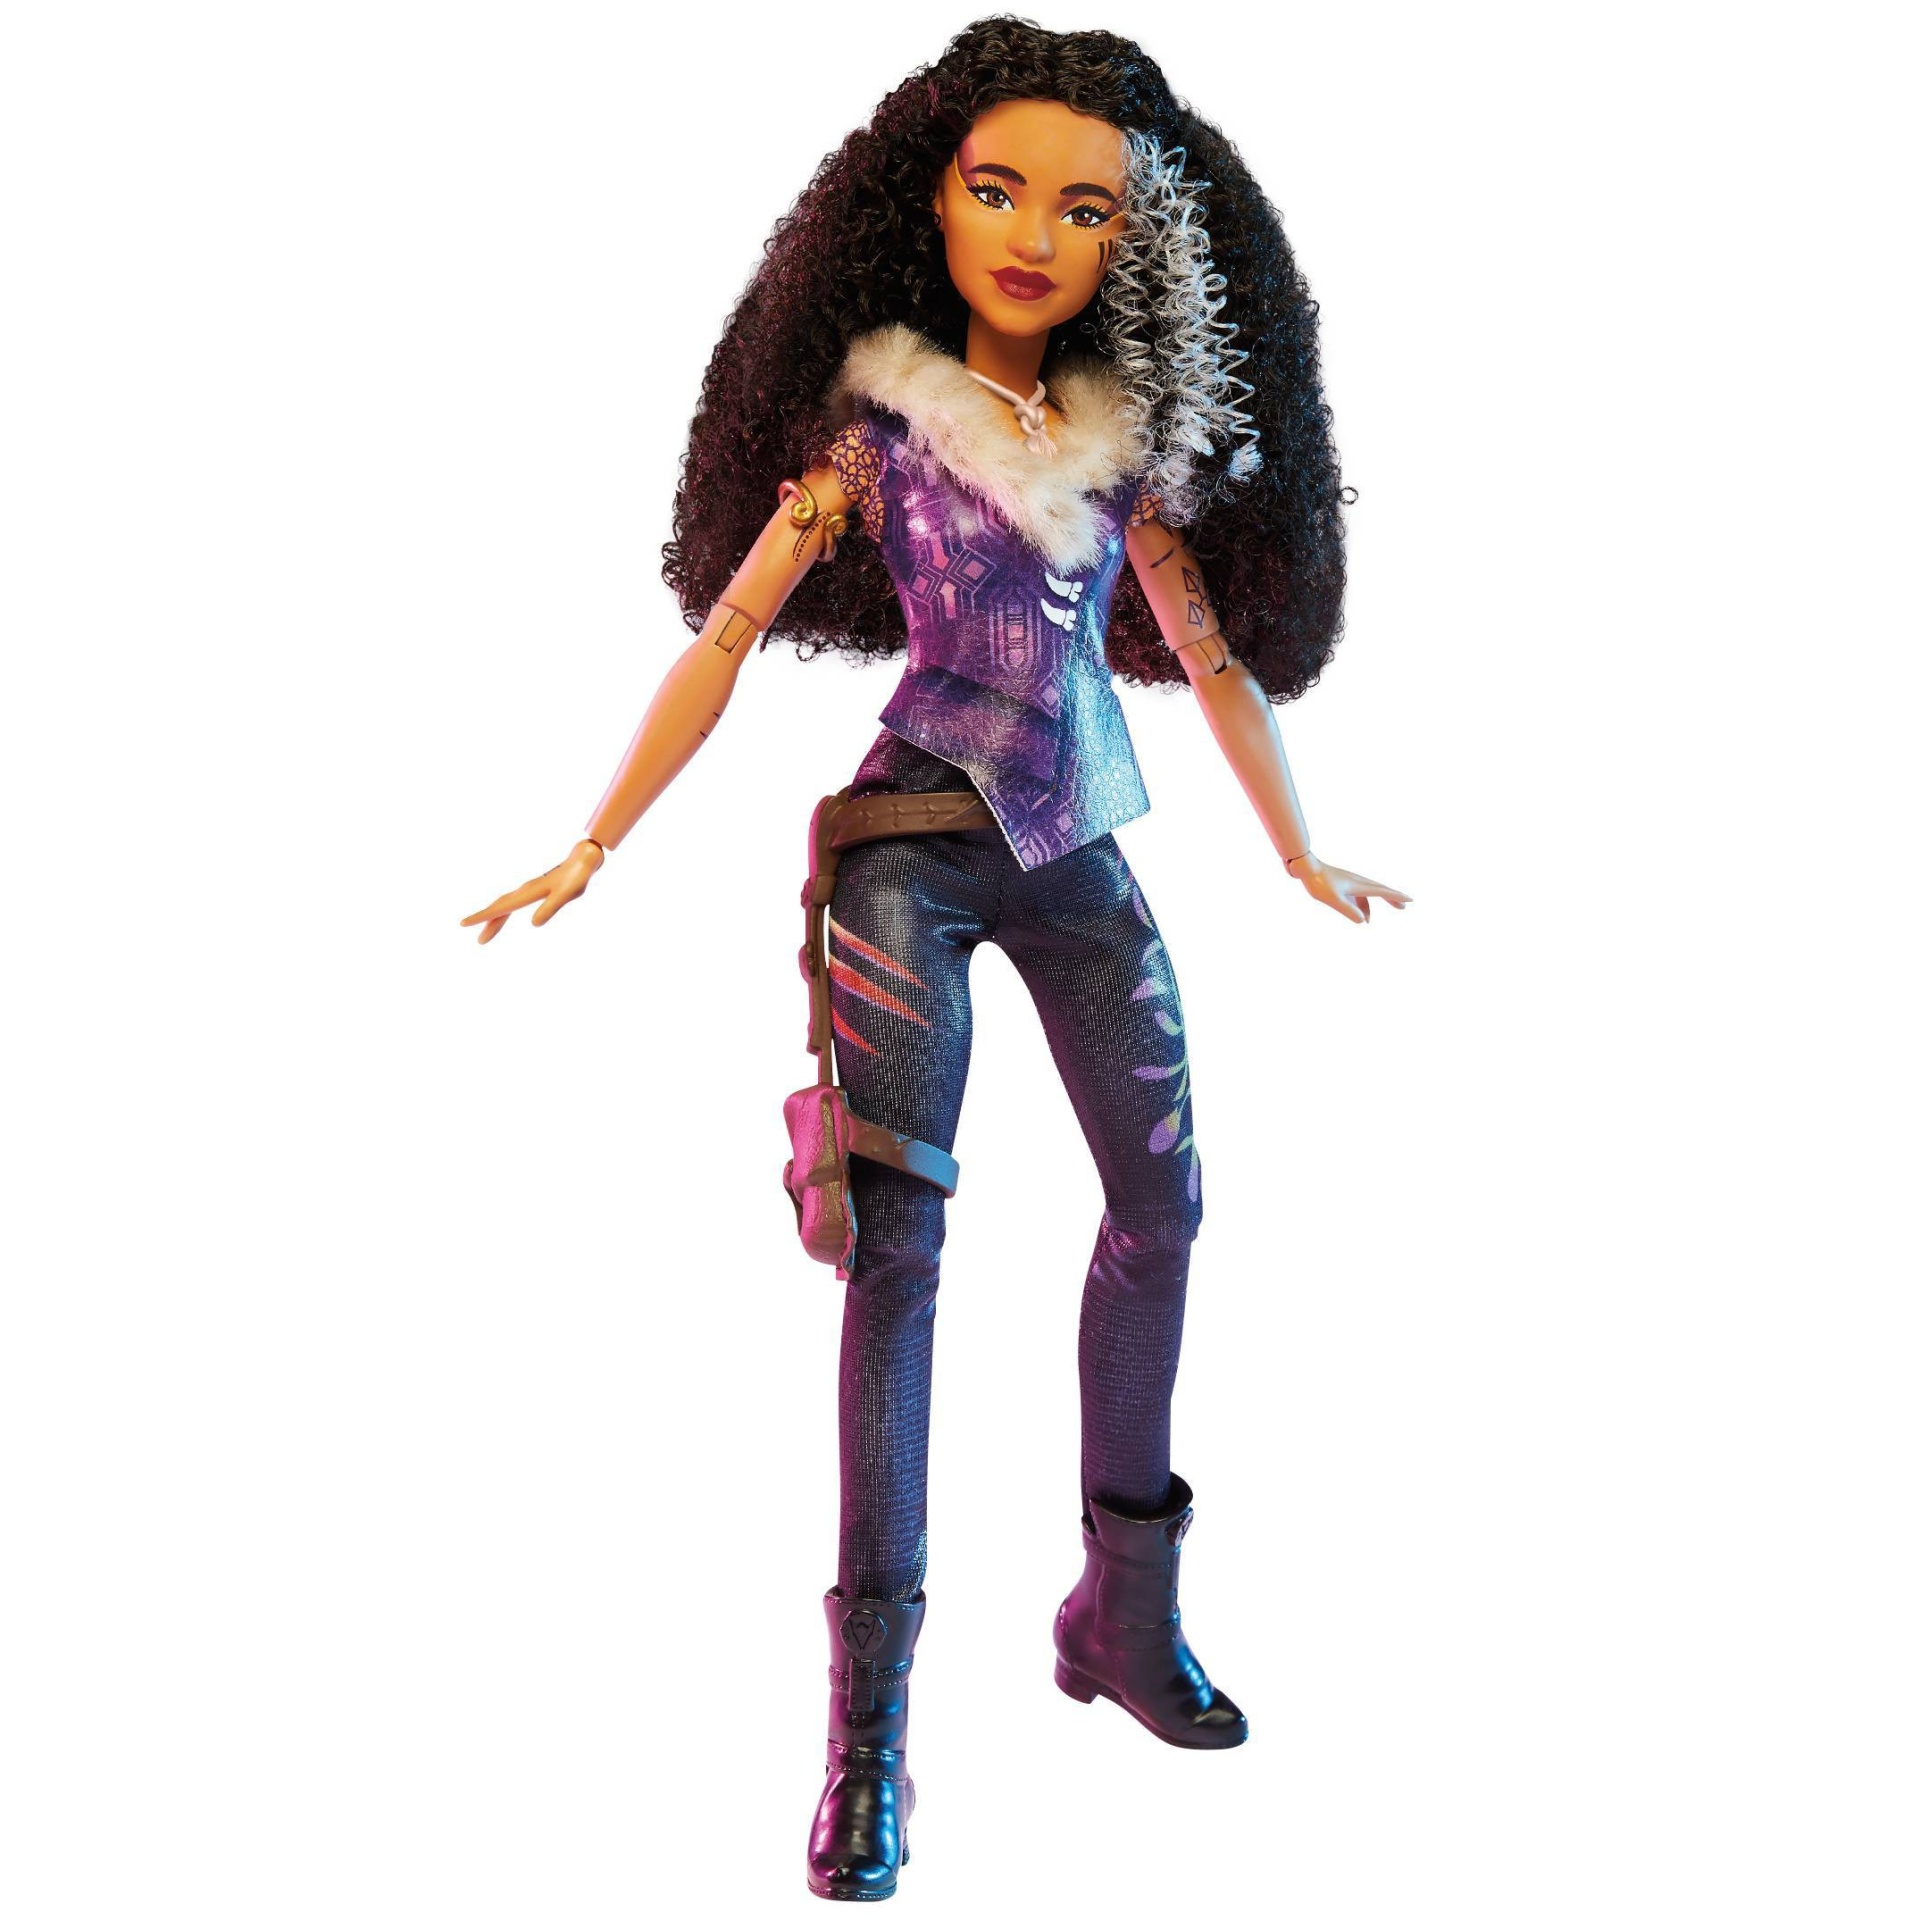 Toy Review: Disney ZOMBIES 3 Dolls by Hasbro - Individual, 4